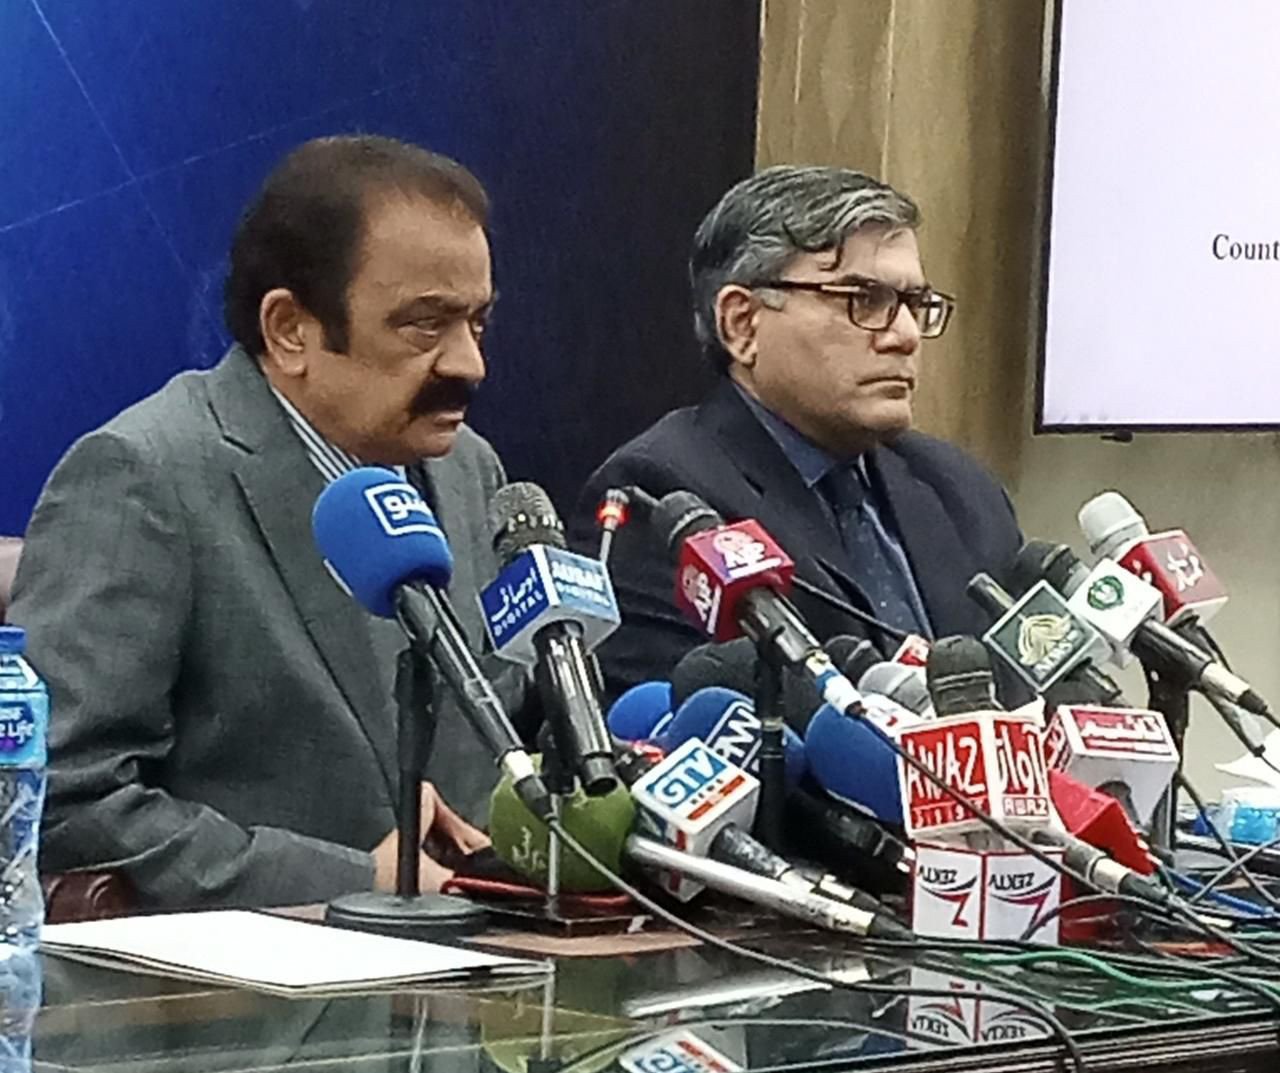 federal minister for interior rana sanaullah alongside additional ig counter terrorism punjab imran mehmood addressing a press conference in islamabad on tuesday photo pid